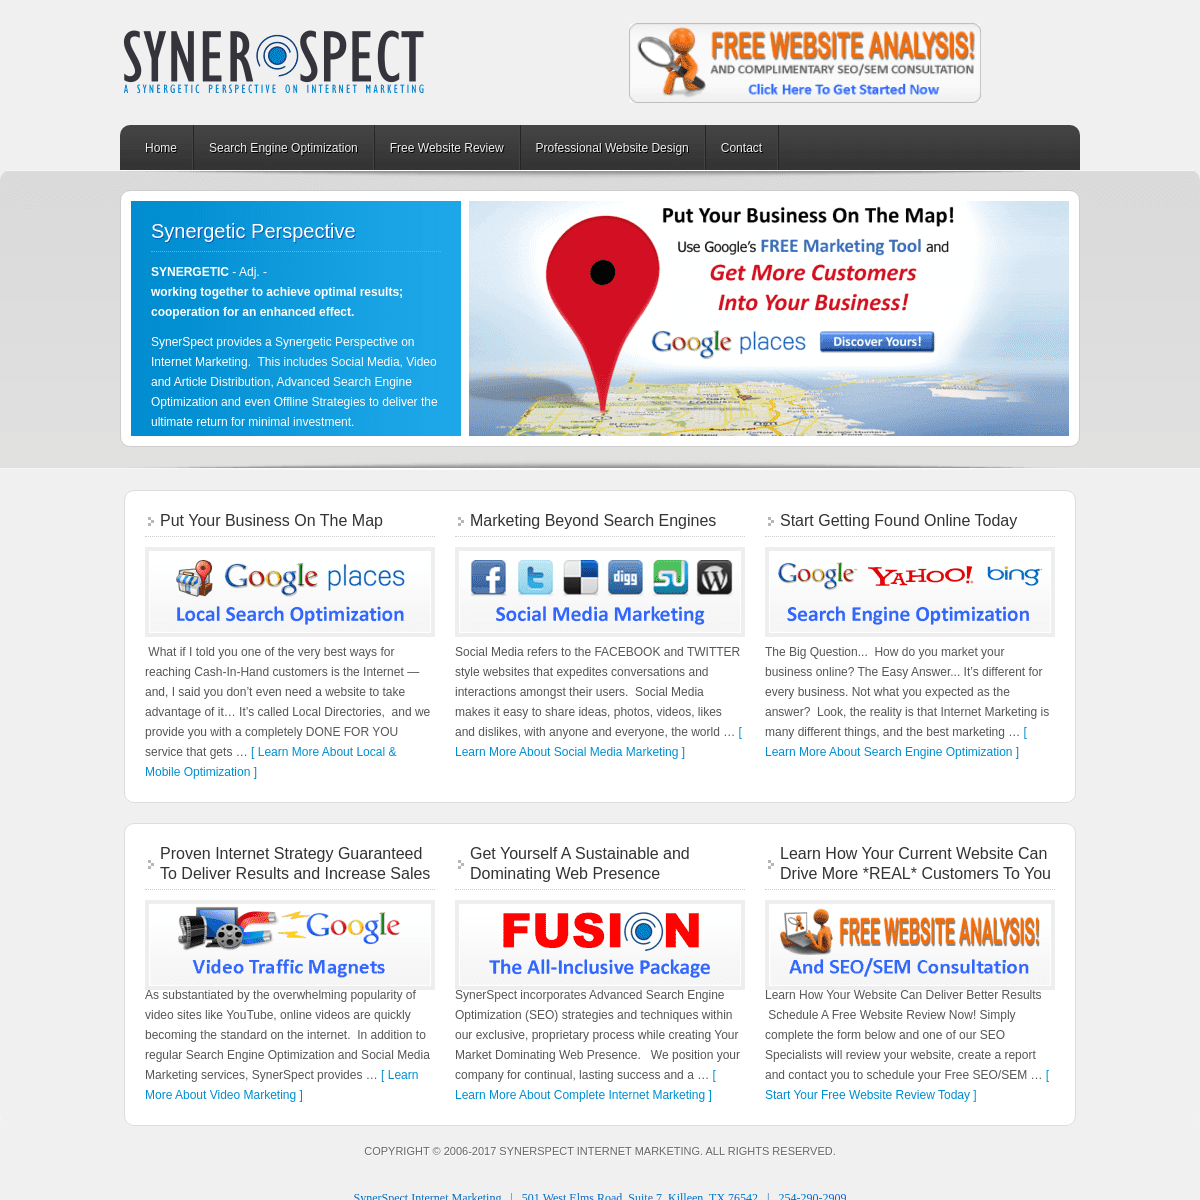 A complete backup of https://synerspect.com